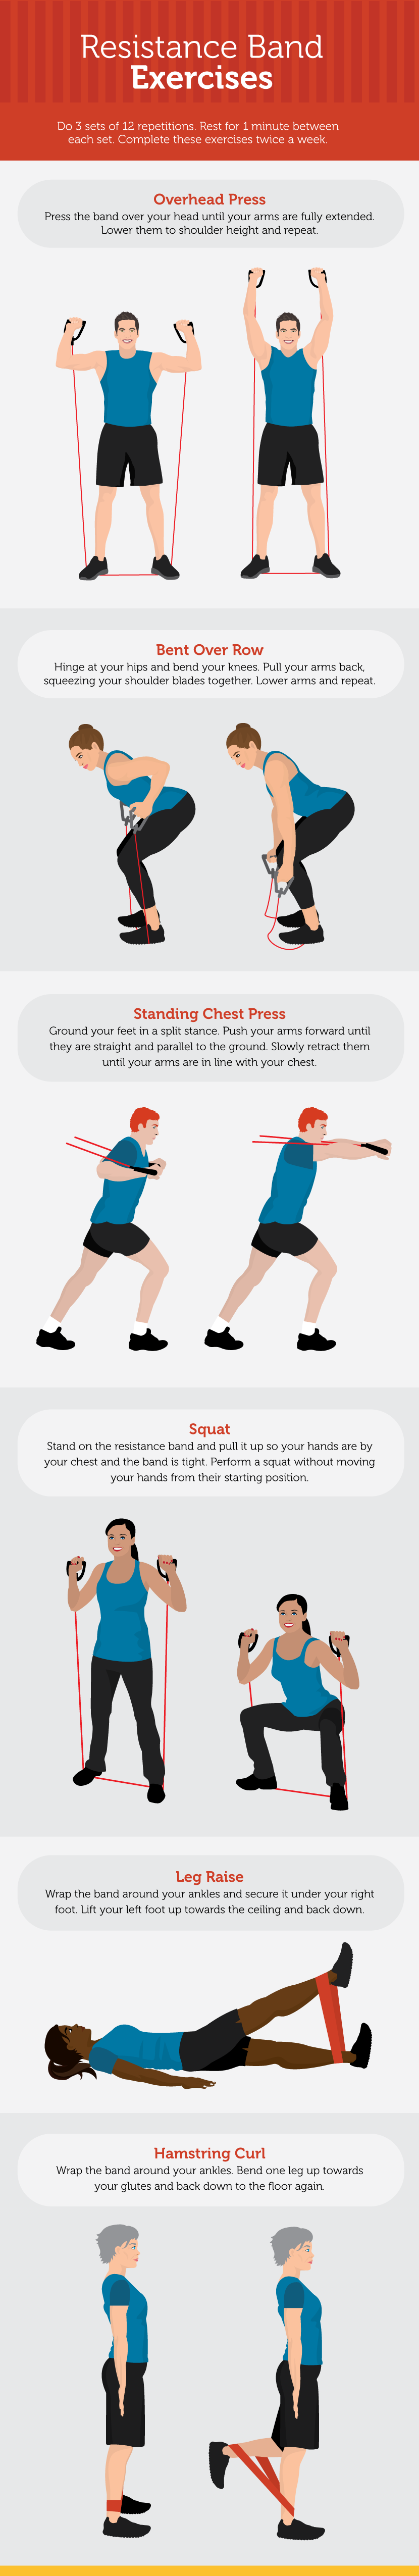 How To Work Out With Resistance Bands At Home